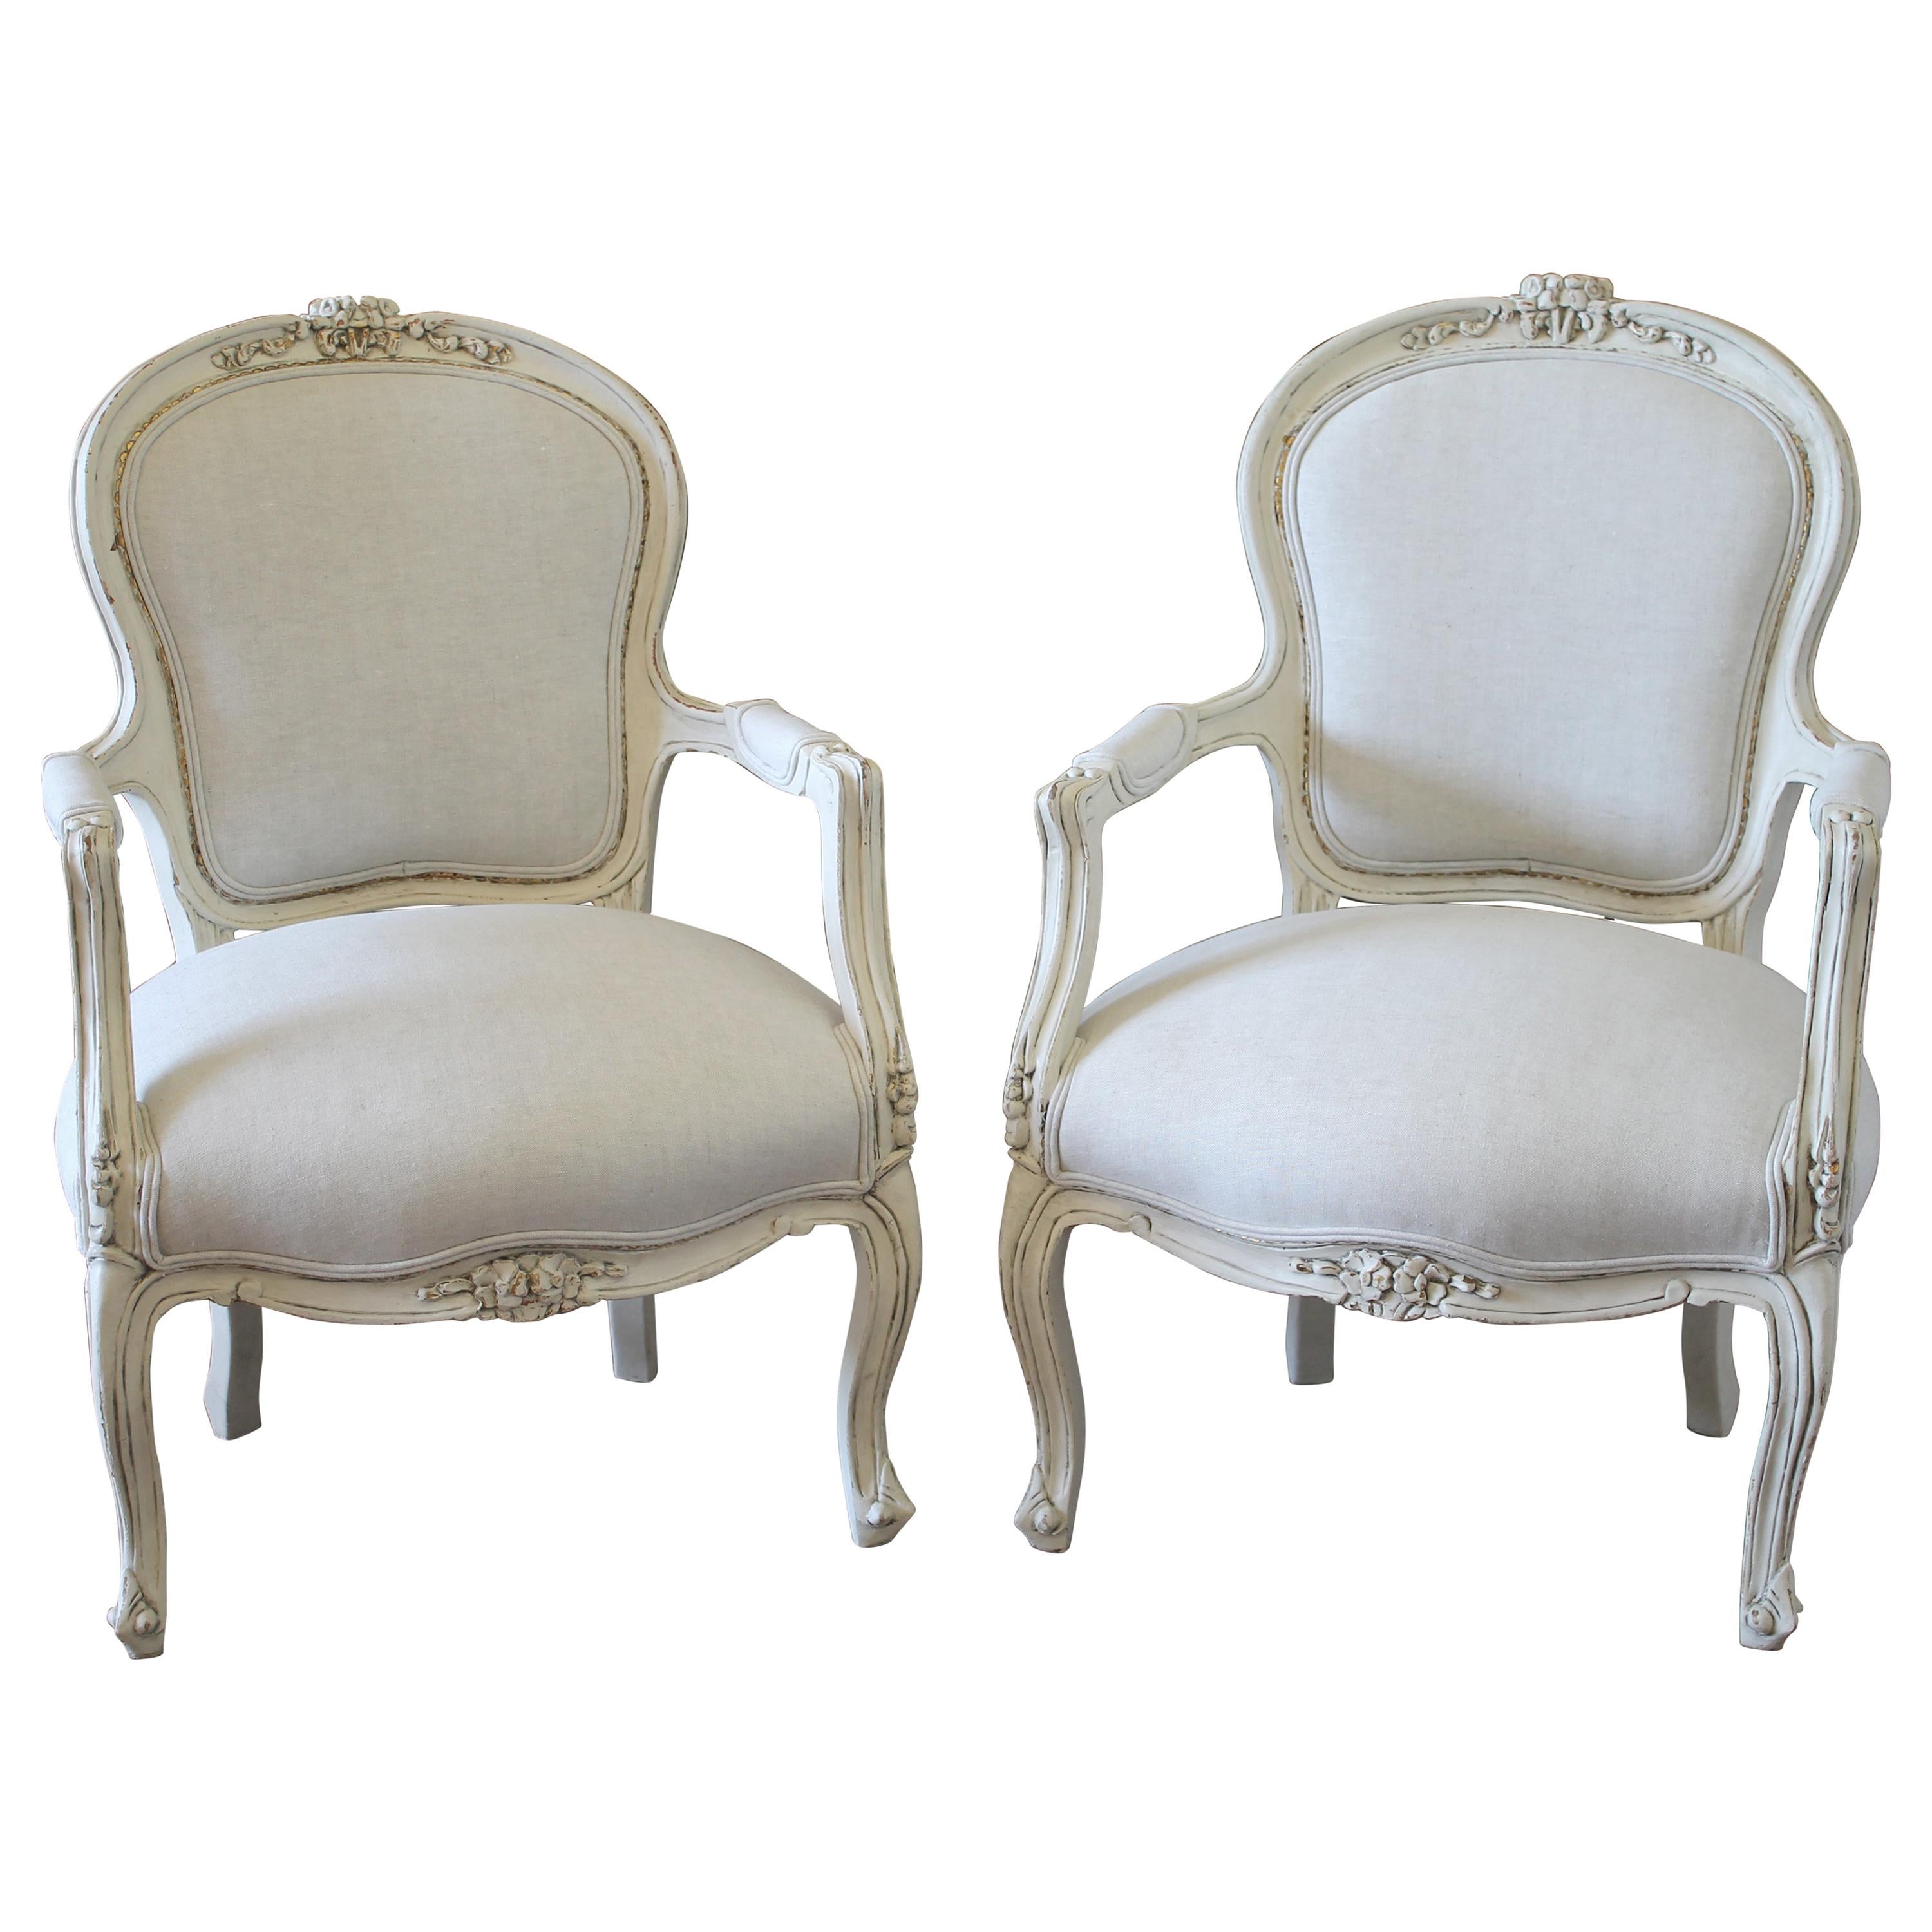 20th Century Pair of Painted and Upholstered Louis XV Style Open Armchairs